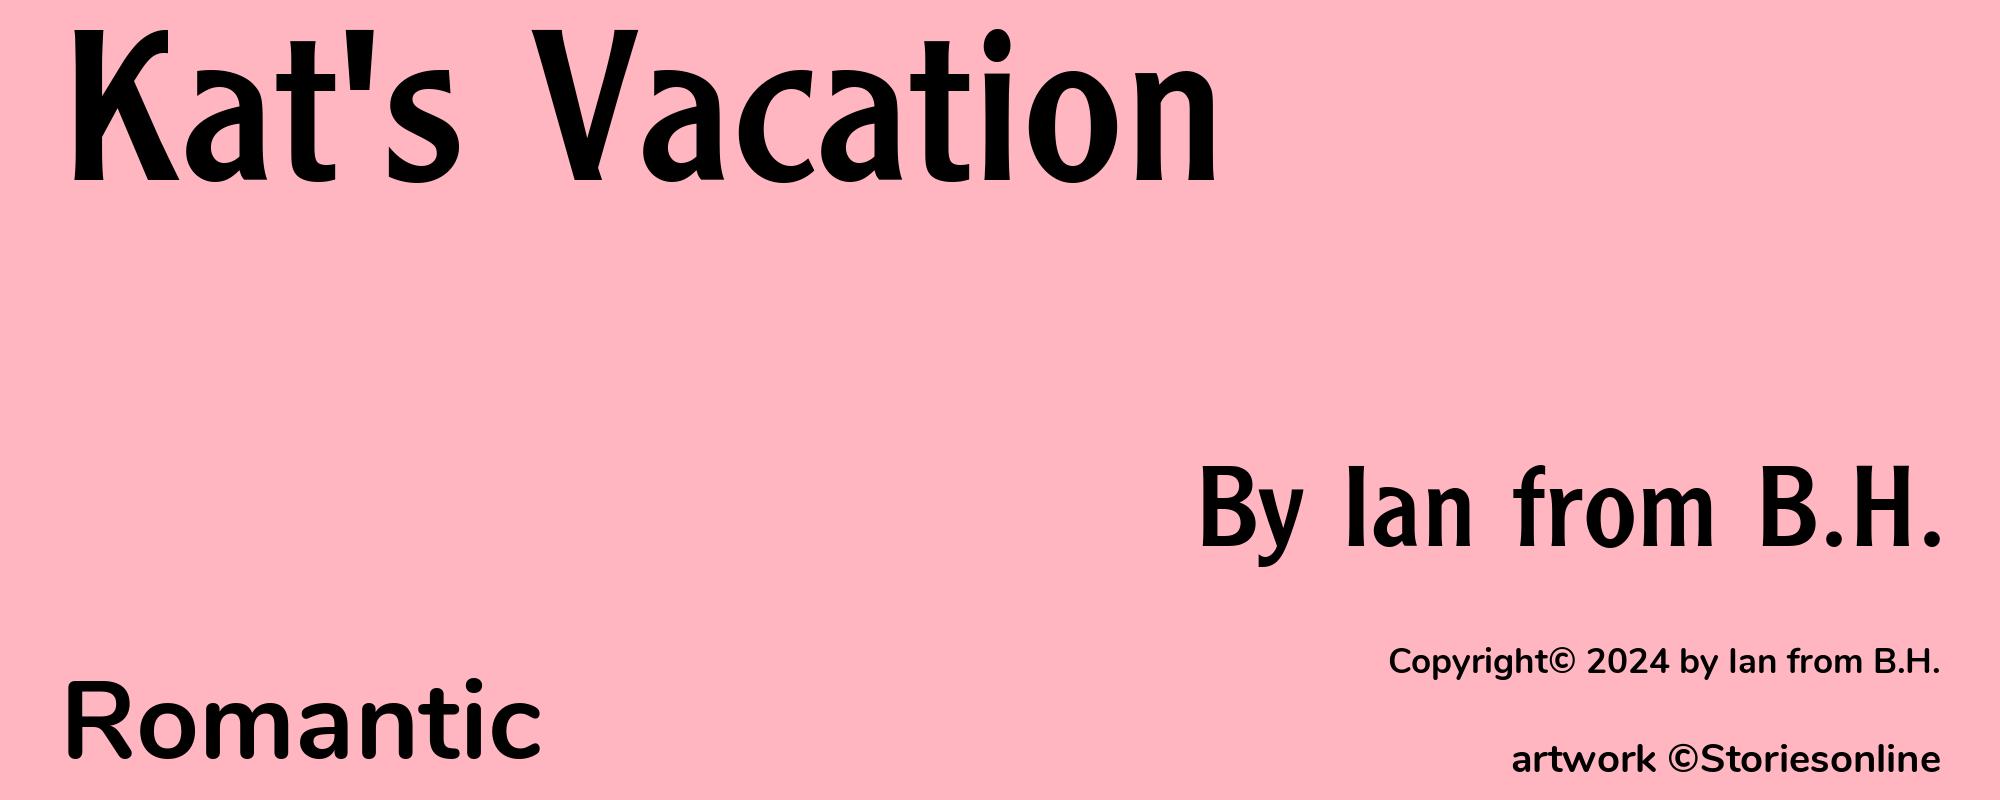 Kat's Vacation - Cover